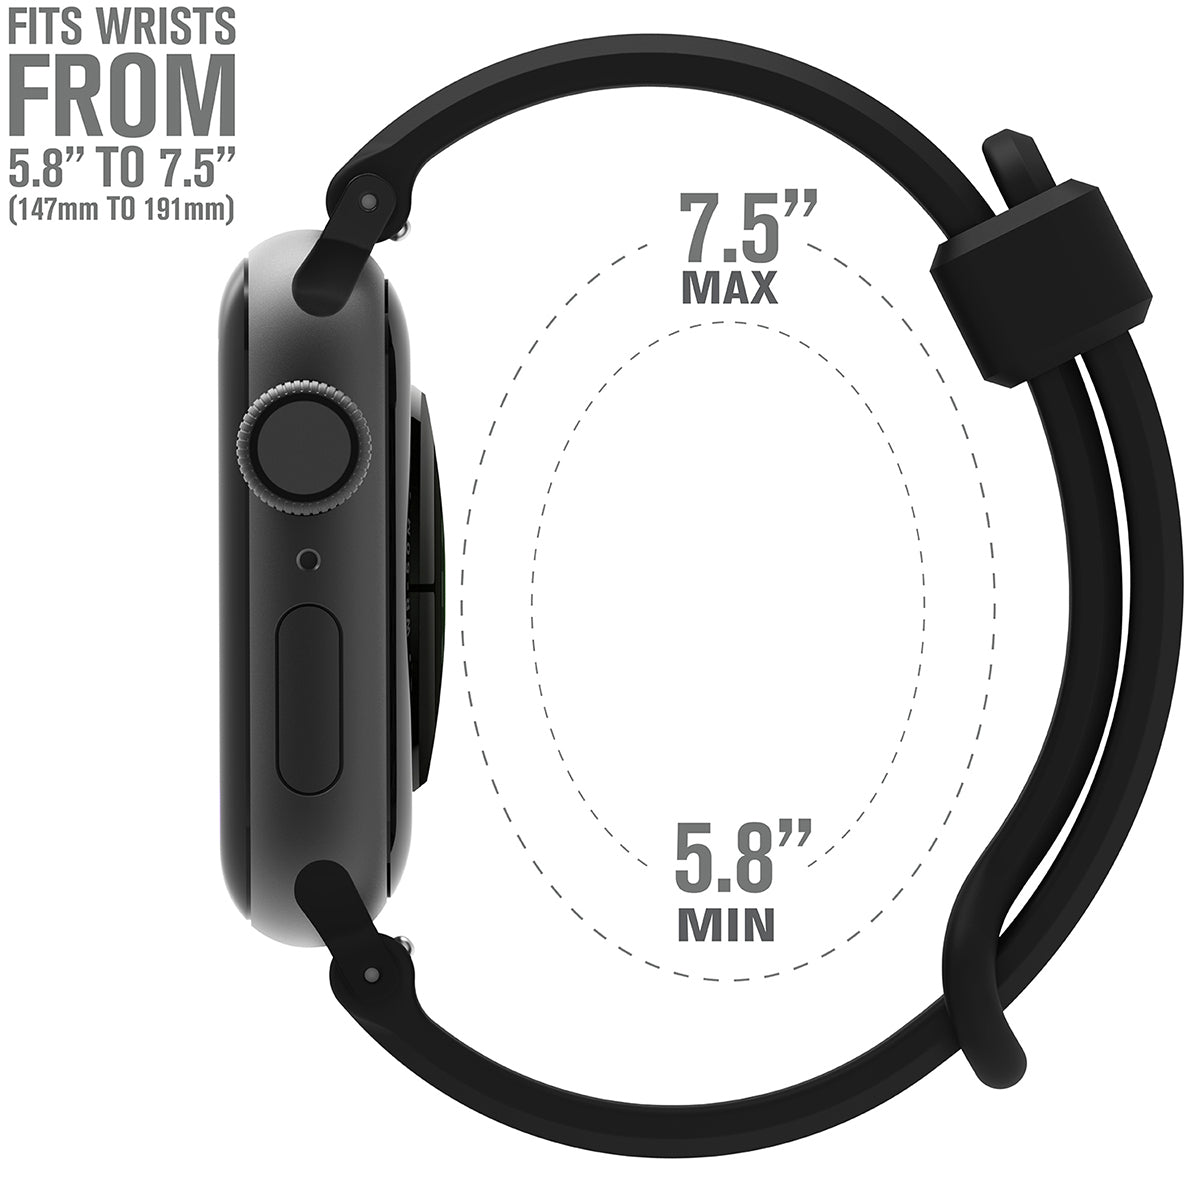 catalyst apple watch series 9 8 7 6 5 4 se gen 2 1 38 40 41mm sports band with apple connector side of the apple watch with the minimum and maximum sizes of the sport band black text reads fits wrists from 5.8" to 7.5"(147mm to 191mm)